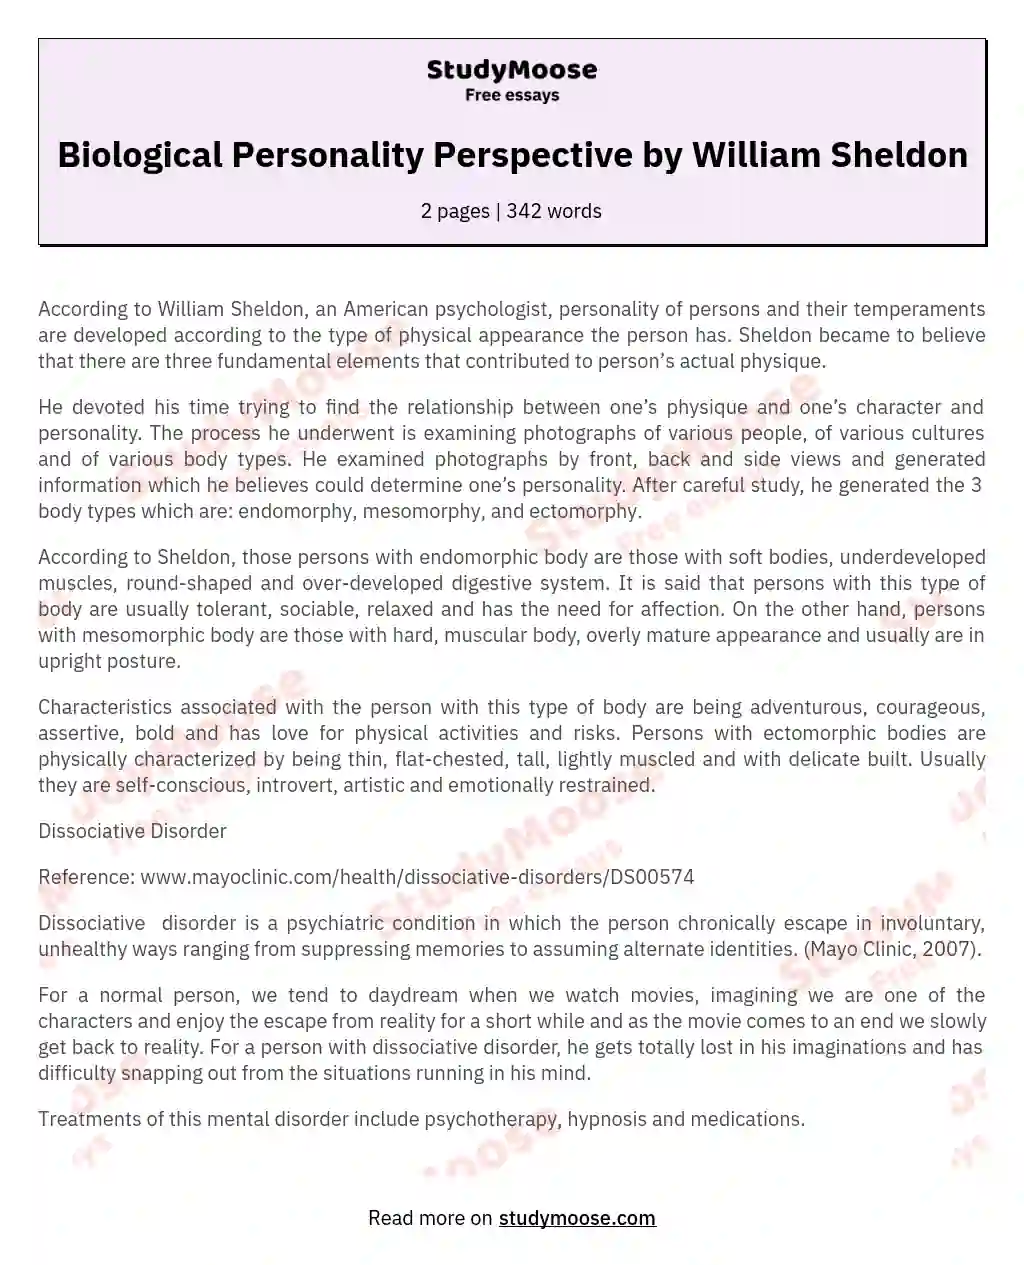 Biological Personality Perspective by William Sheldon essay